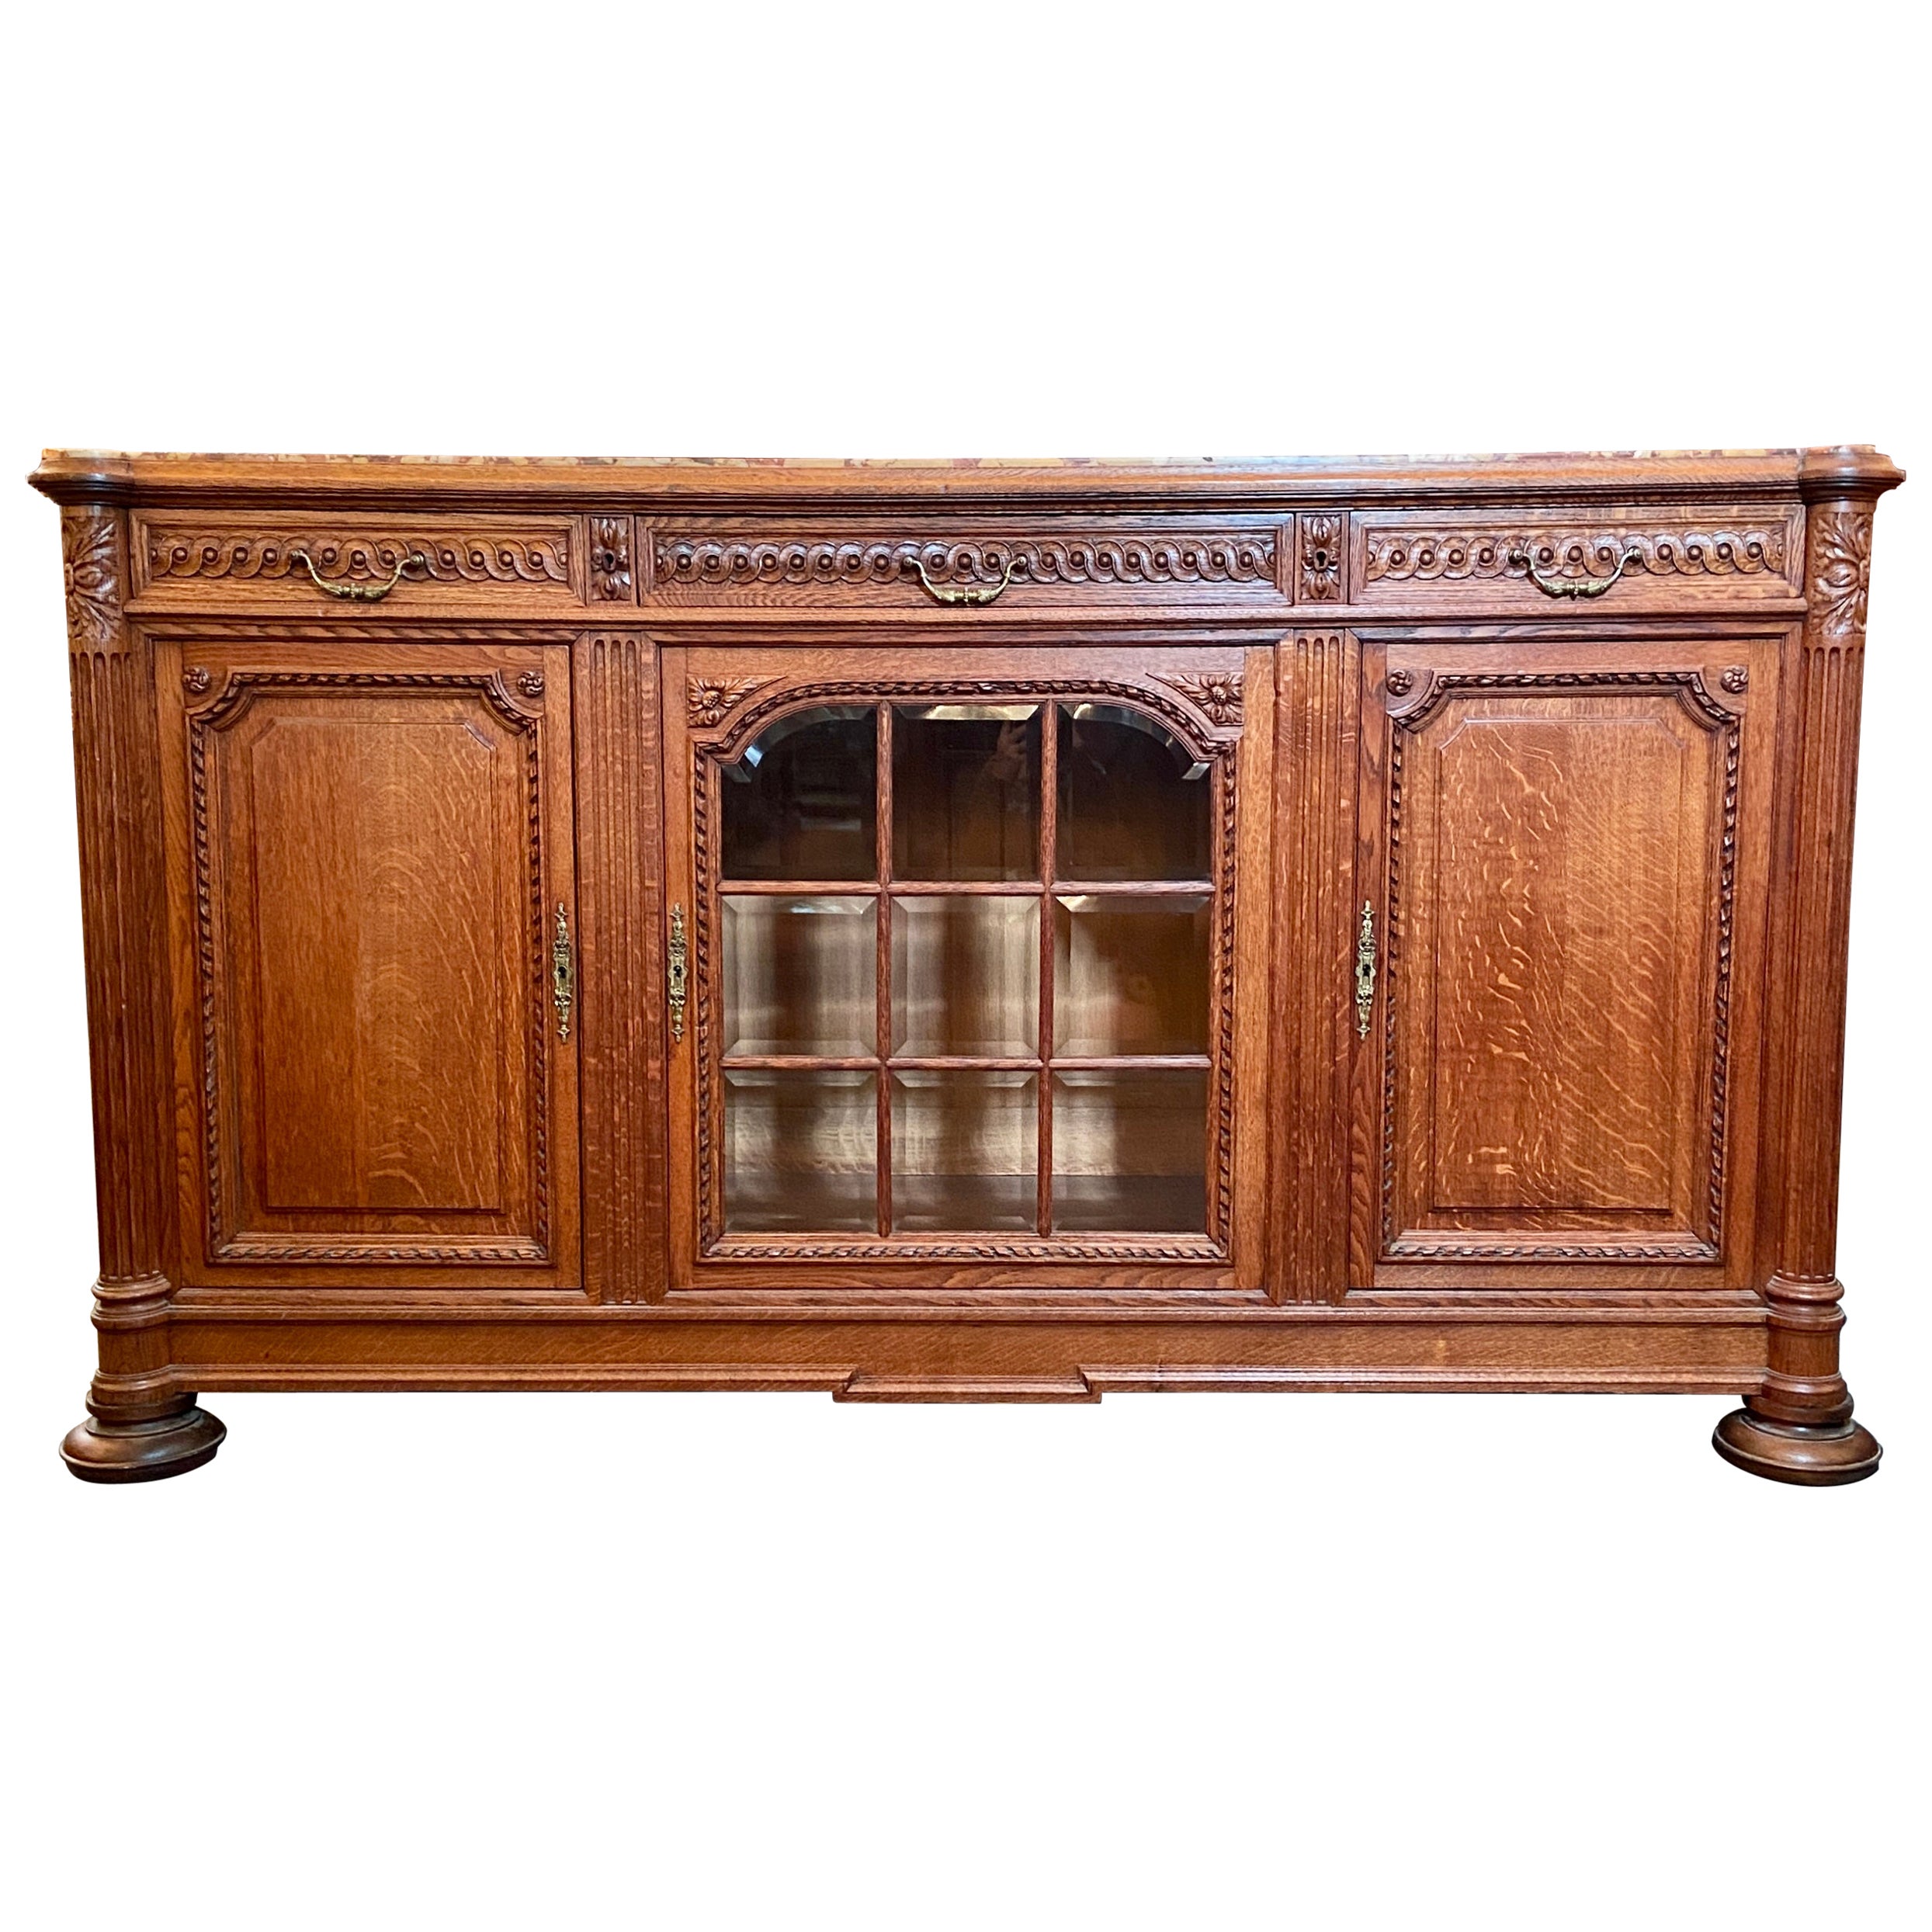 Antique French Carved Oak & Beveled Glass Buffet w/ Original Marble Top, C. 1900